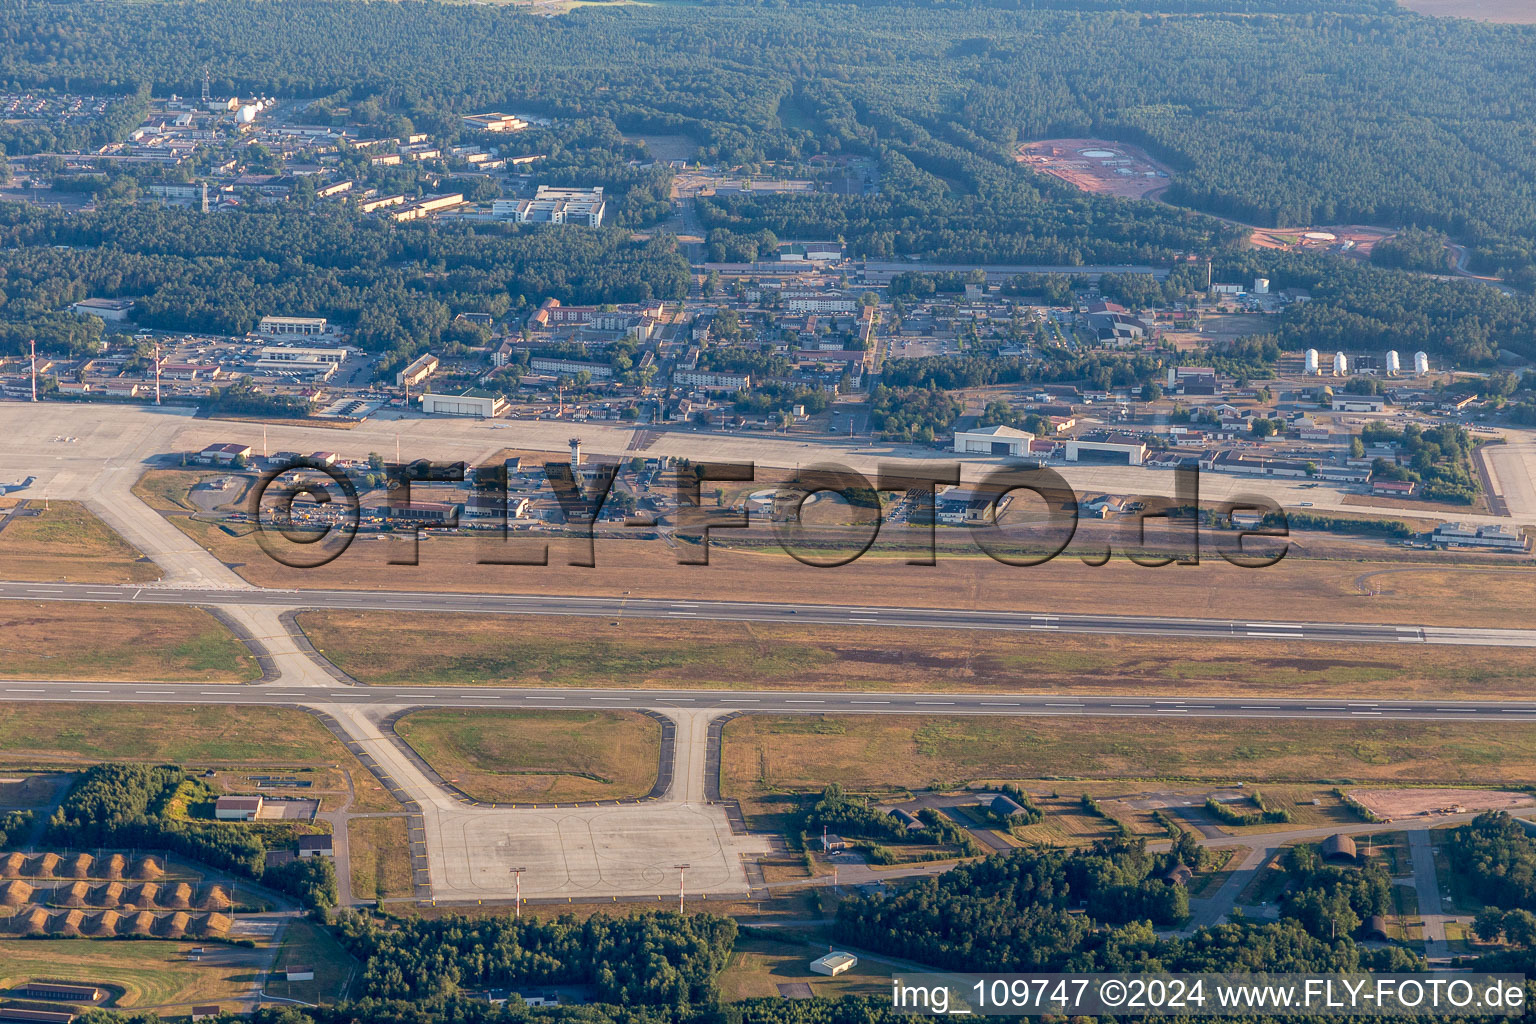 Oblique view of US Air Base in Ramstein in the state Rhineland-Palatinate, Germany